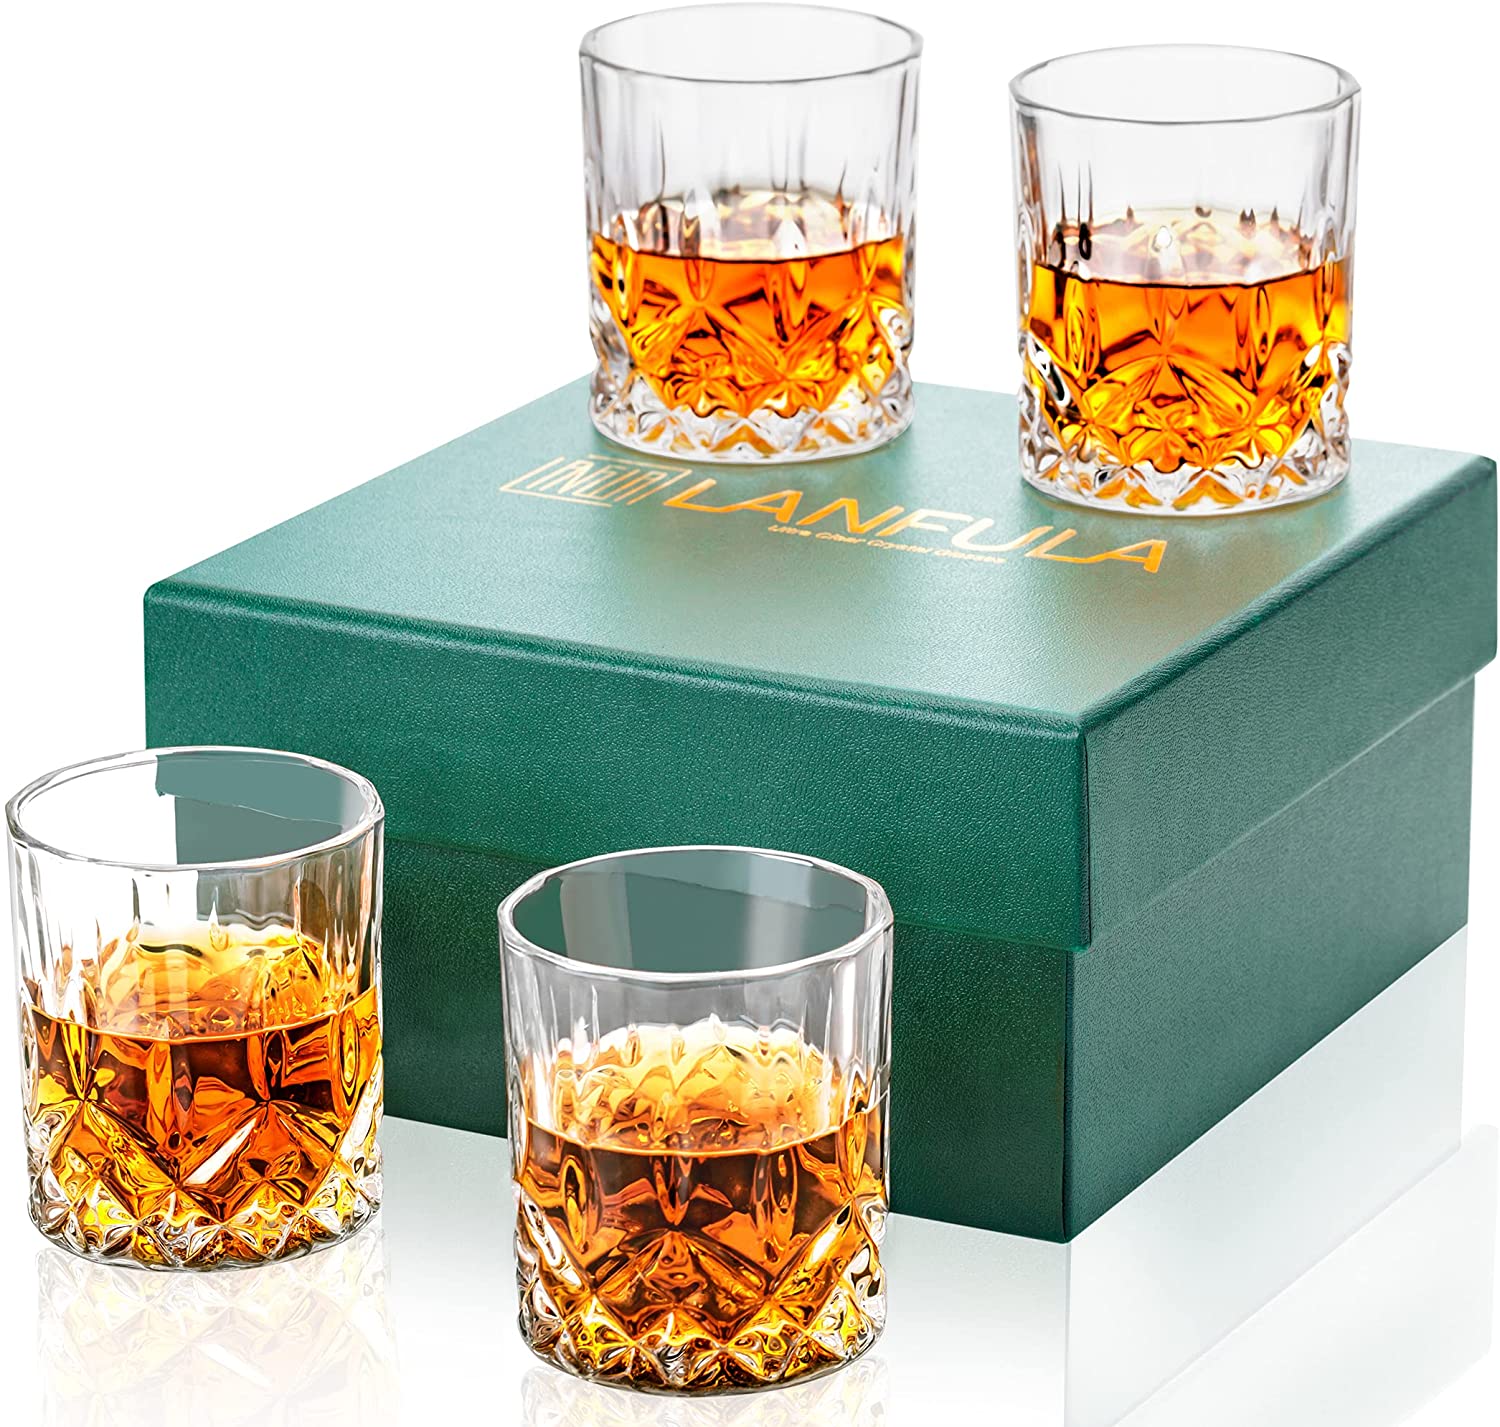 Classic whiskey glass for high level whisky wine